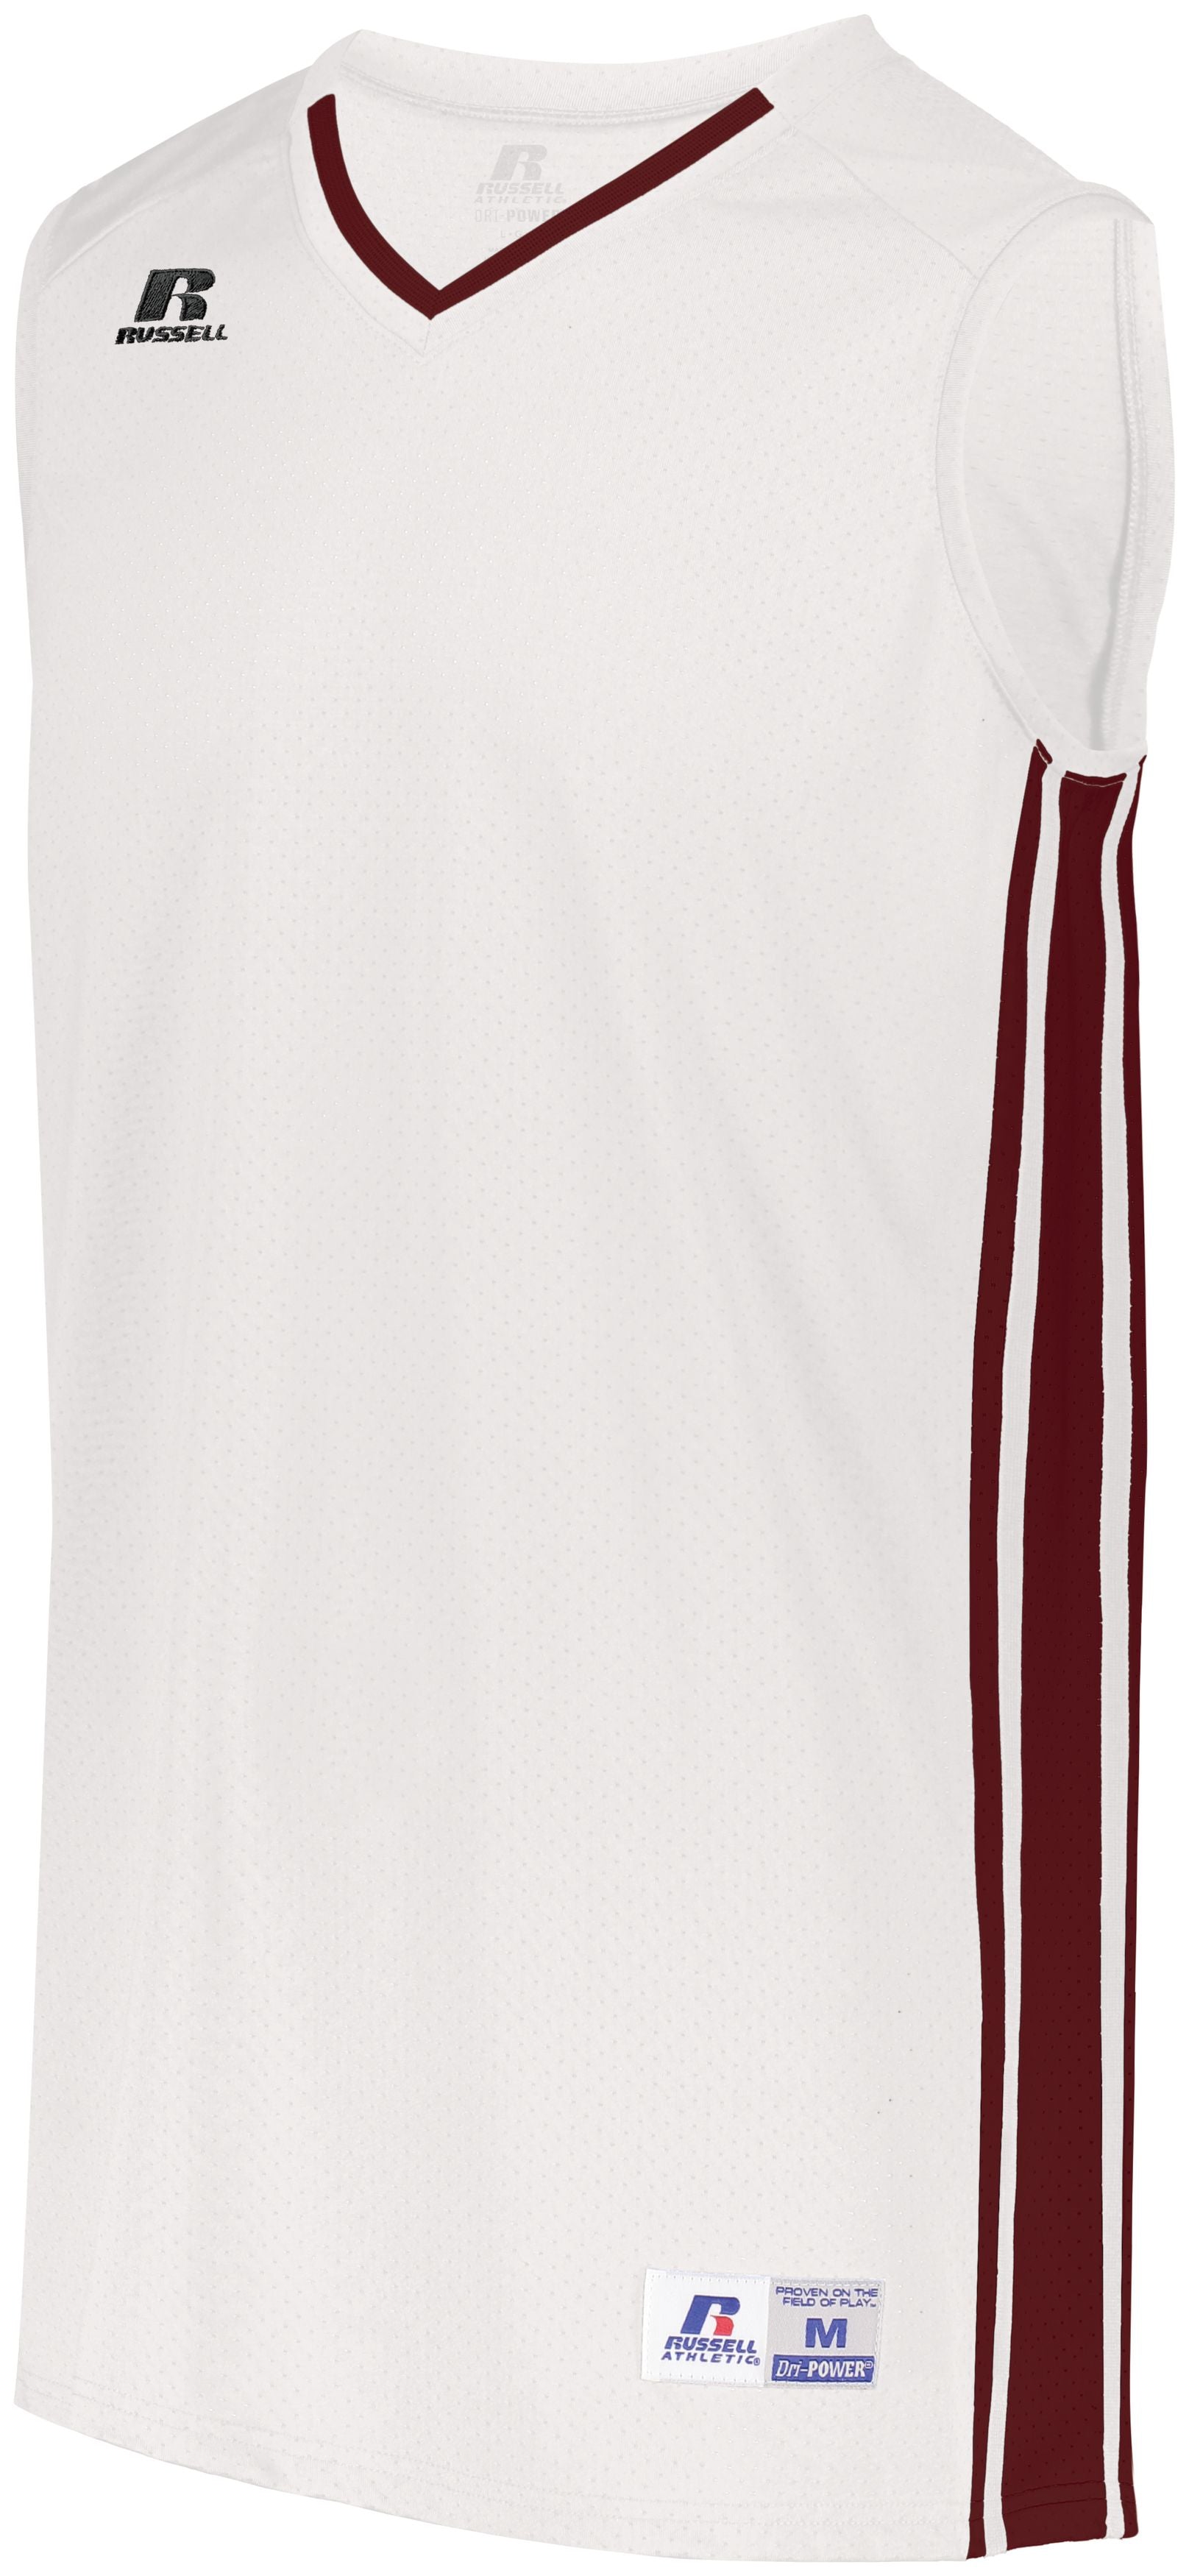 Russell Athletic Legacy Basketball Jersey in White/Cardinal  -Part of the Adult, Adult-Jersey, Basketball, Russell-Athletic-Products, Shirts, All-Sports, All-Sports-1 product lines at KanaleyCreations.com